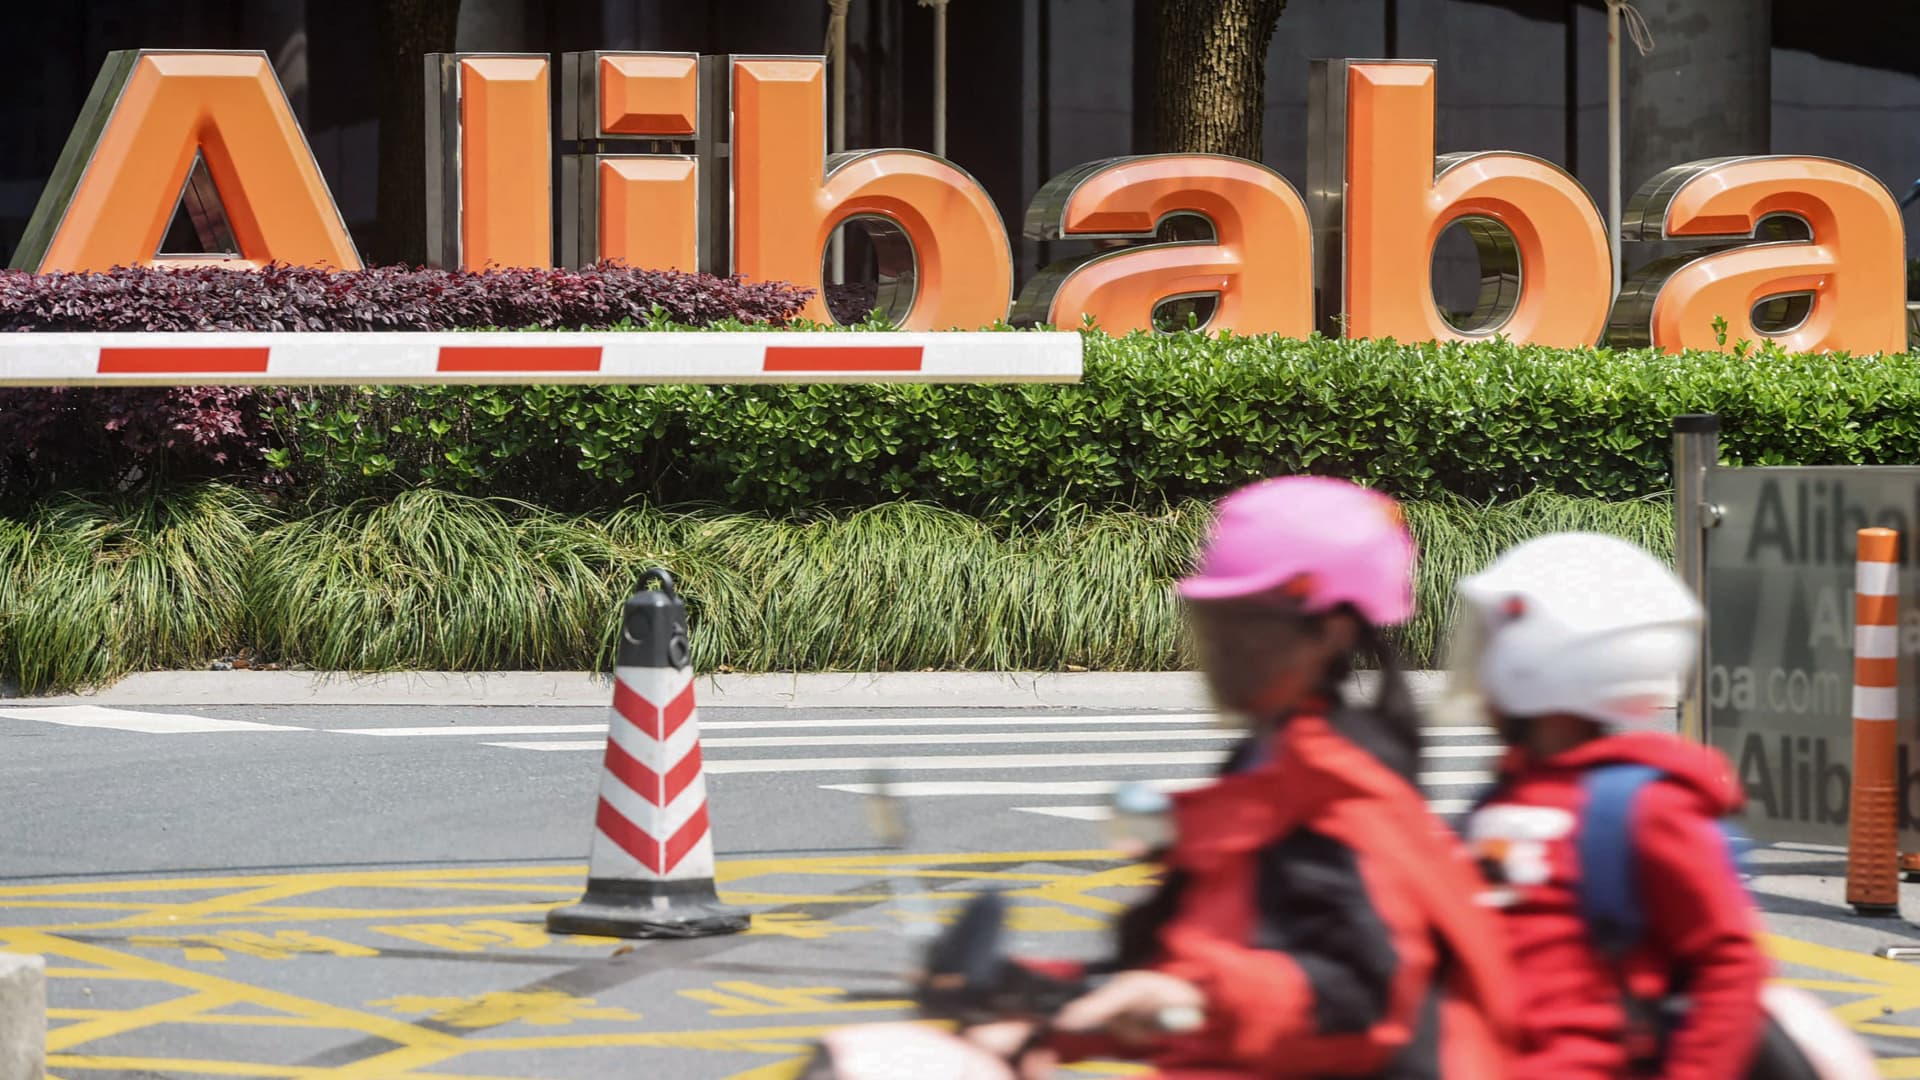 Here’s what China’s Alibaba and Kuaishou say about the economy